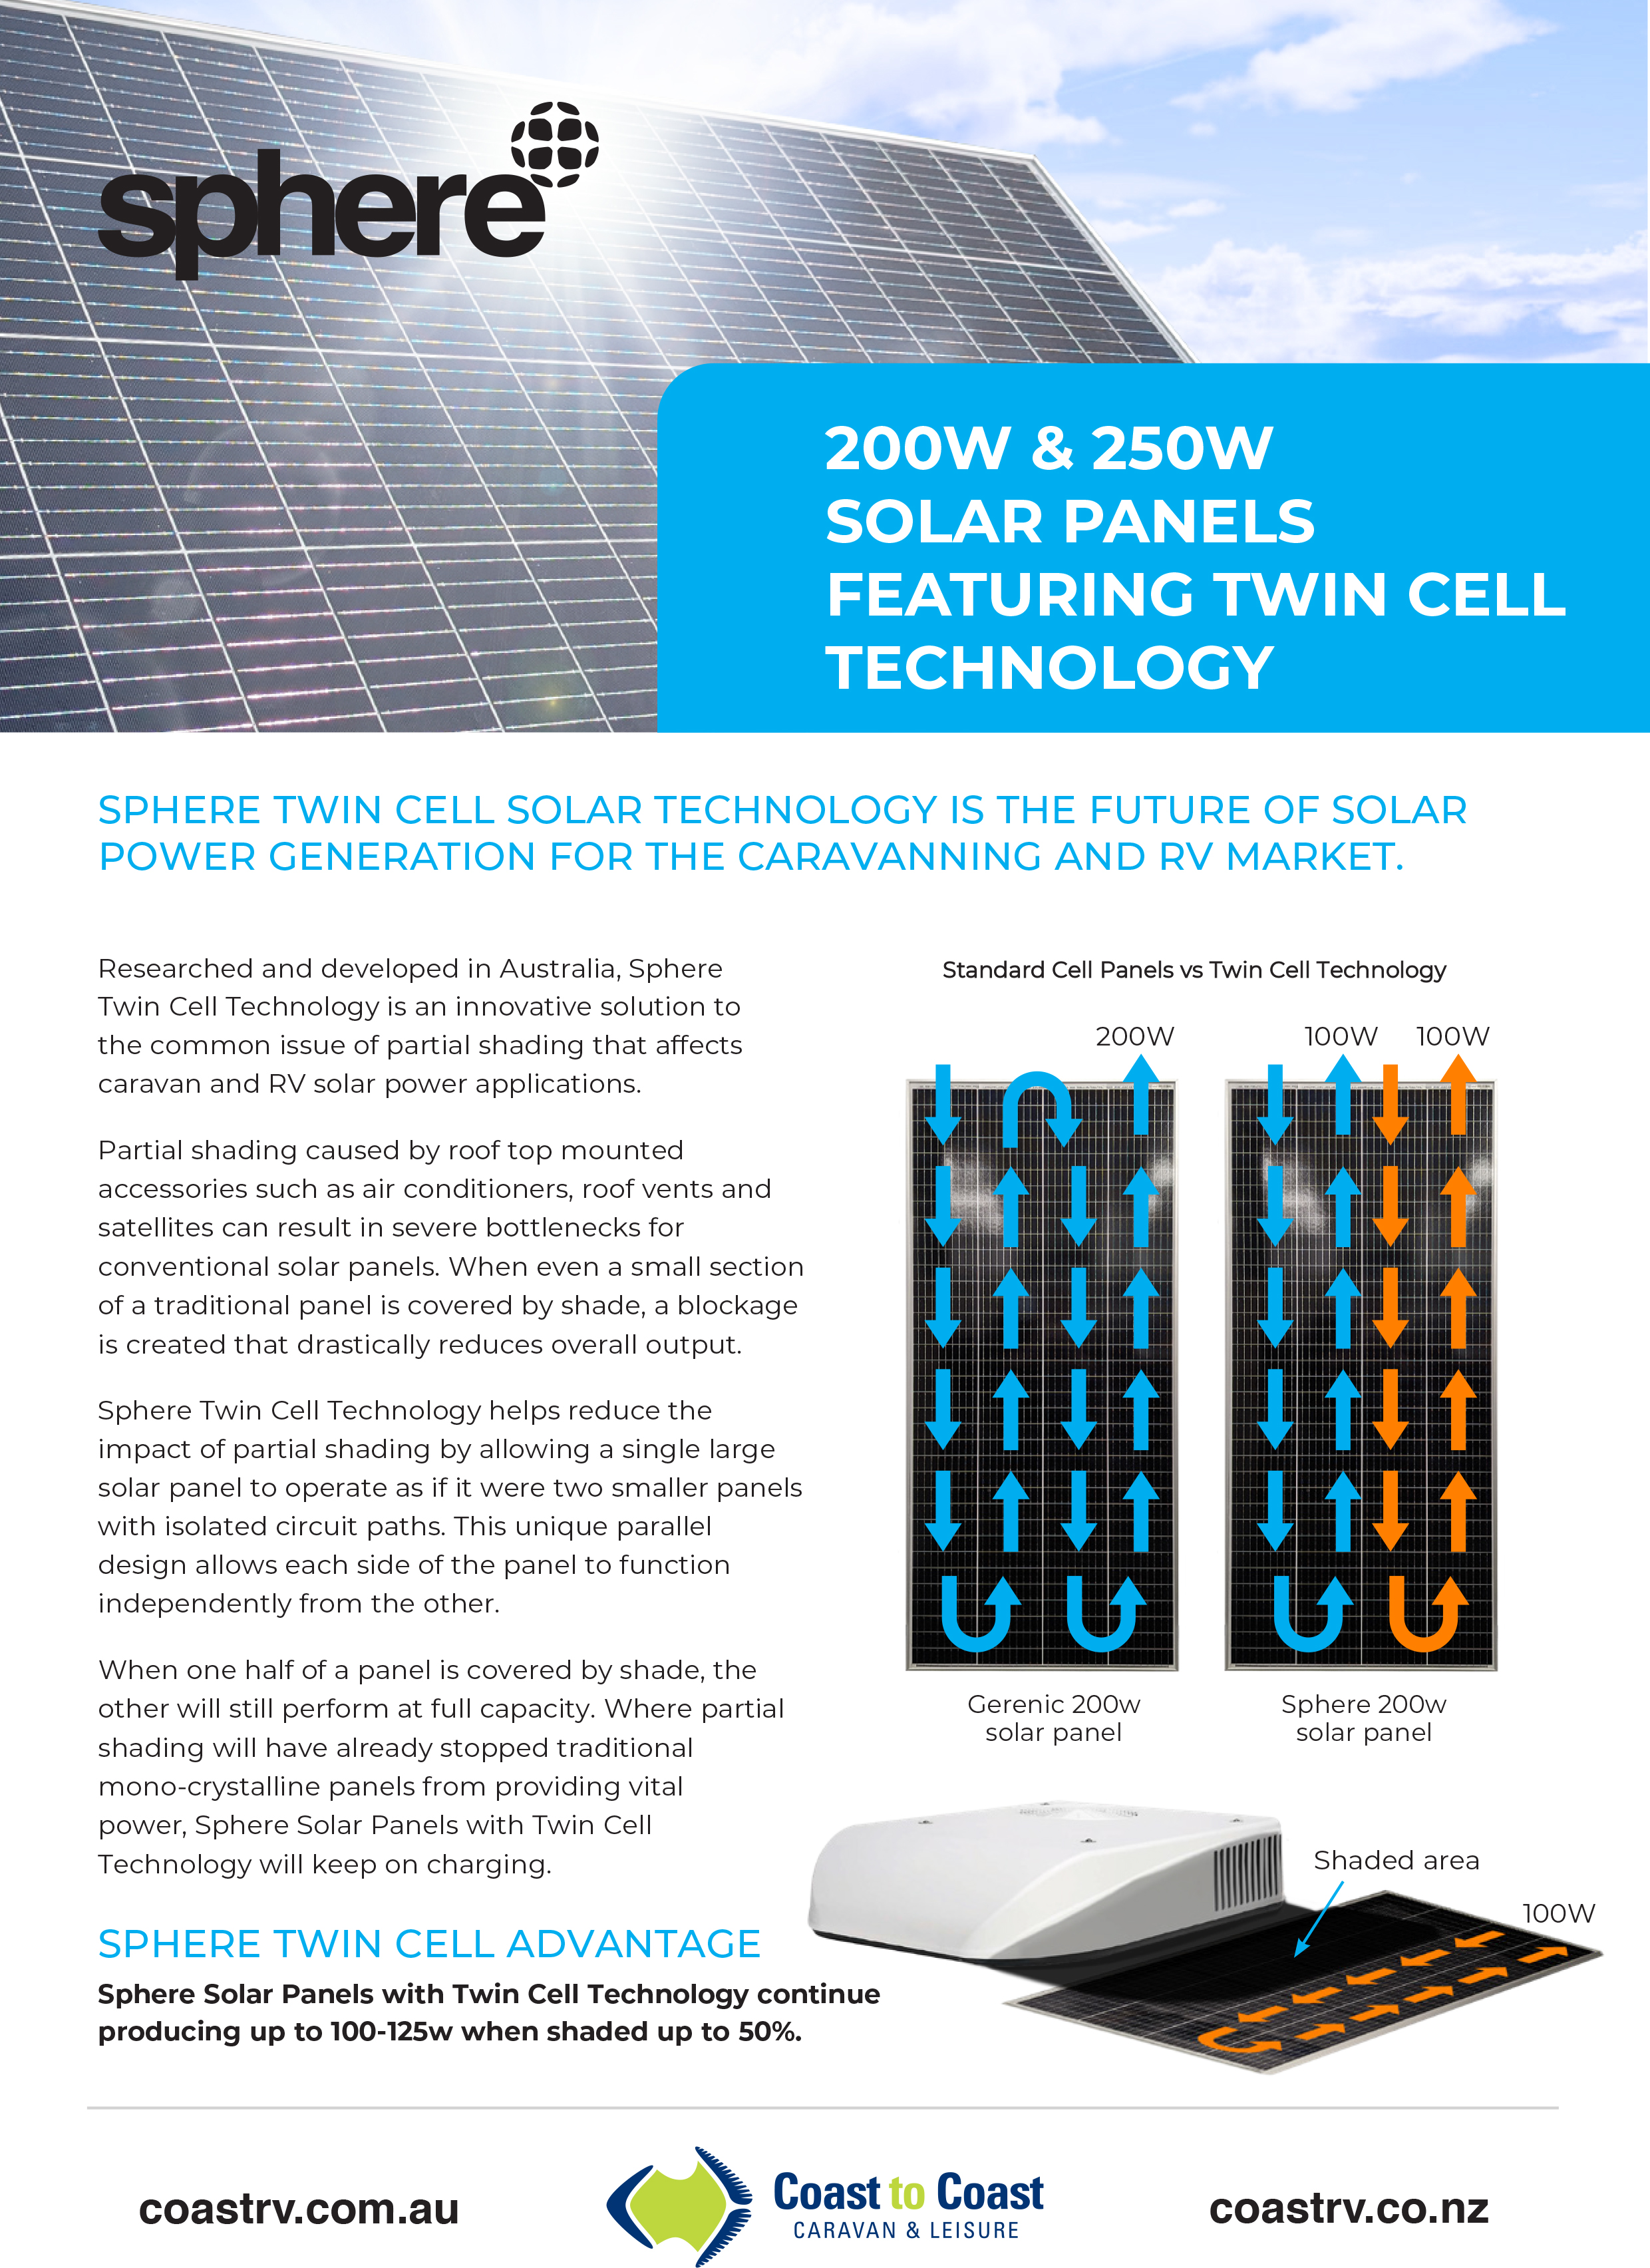 Sphere Solar Panel with Twin Cell Technology